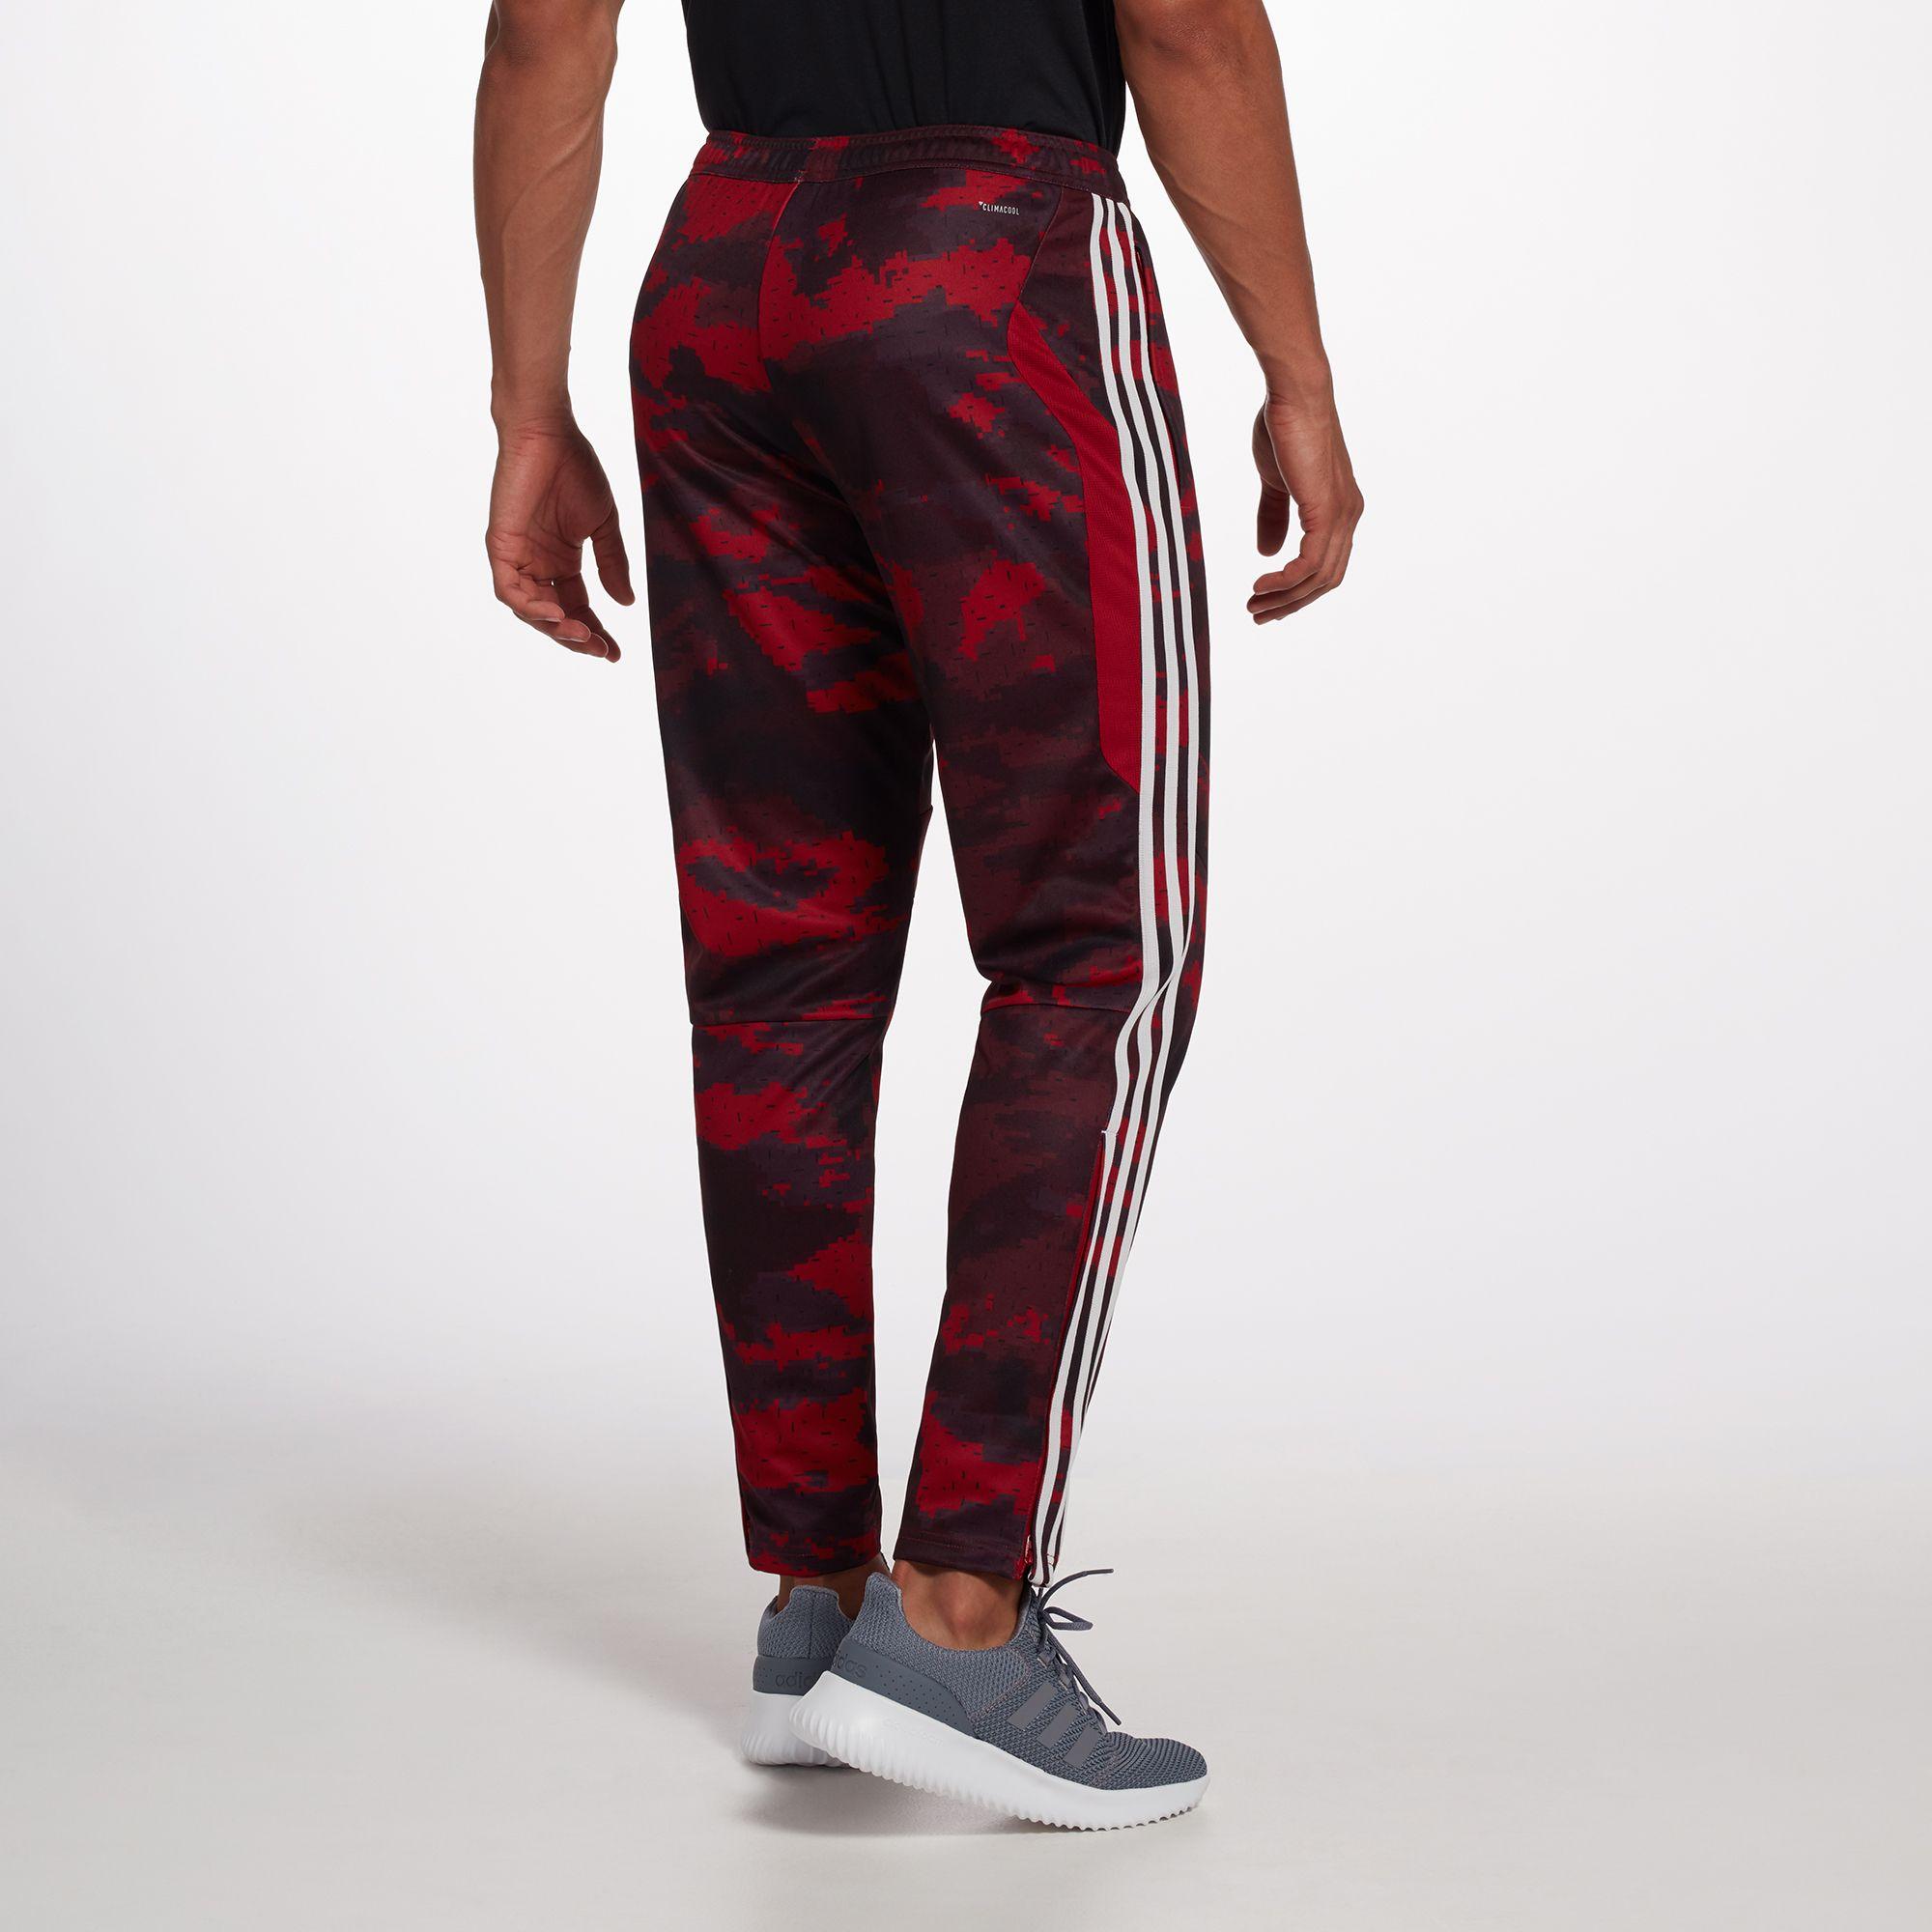 adidas Tiro 19 Camo Training Pants in Red for Men - Lyst